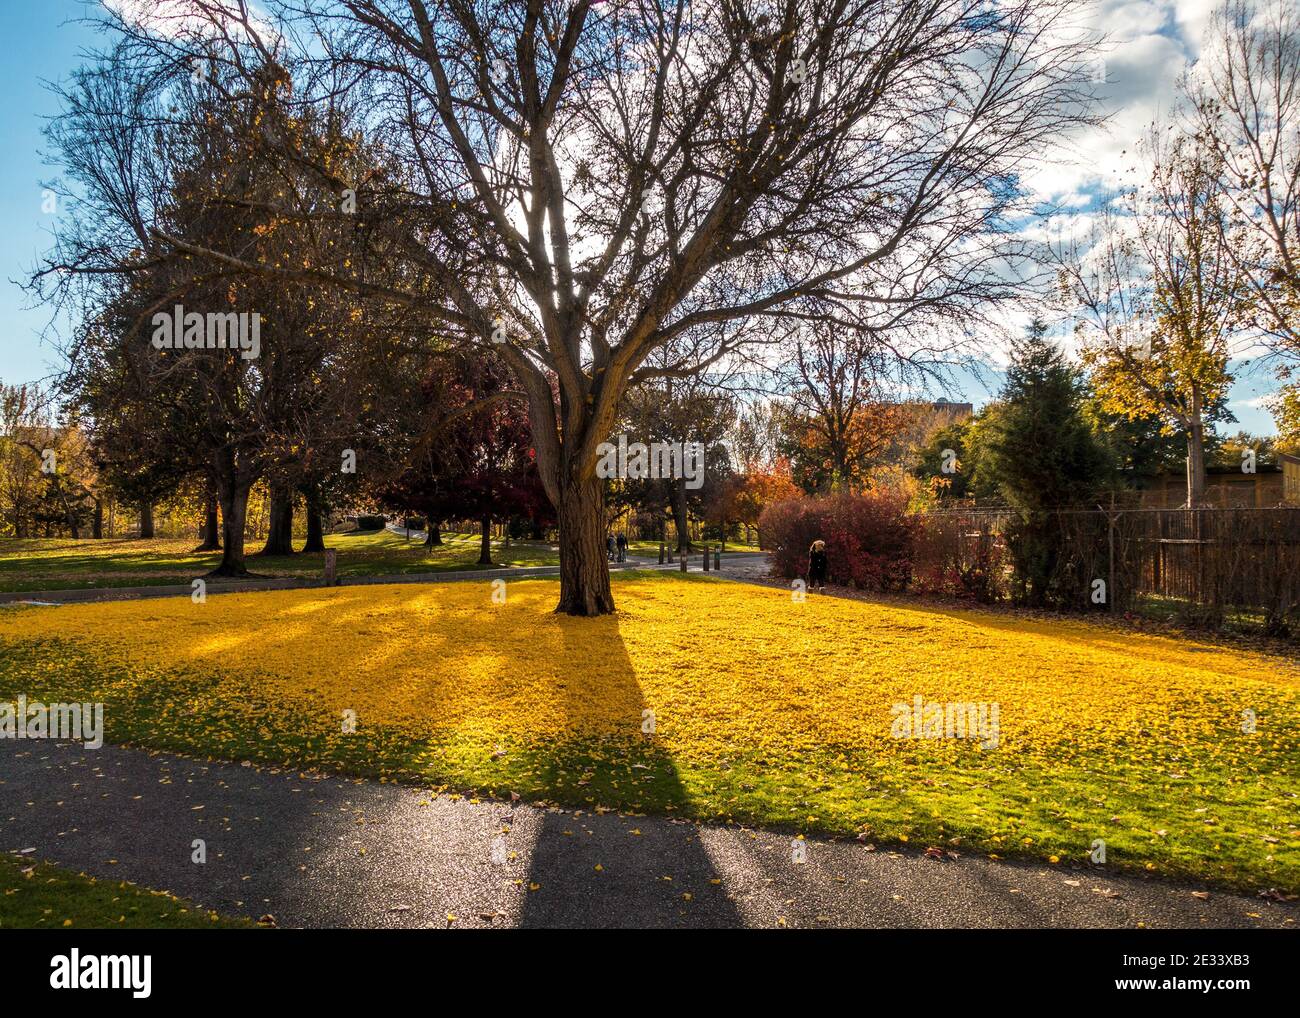 The same Ginkgo biloba tree photographed within a less-than 24 hour time period. One shows tree surrounded by a golden circle, the other by snow. Stock Photo